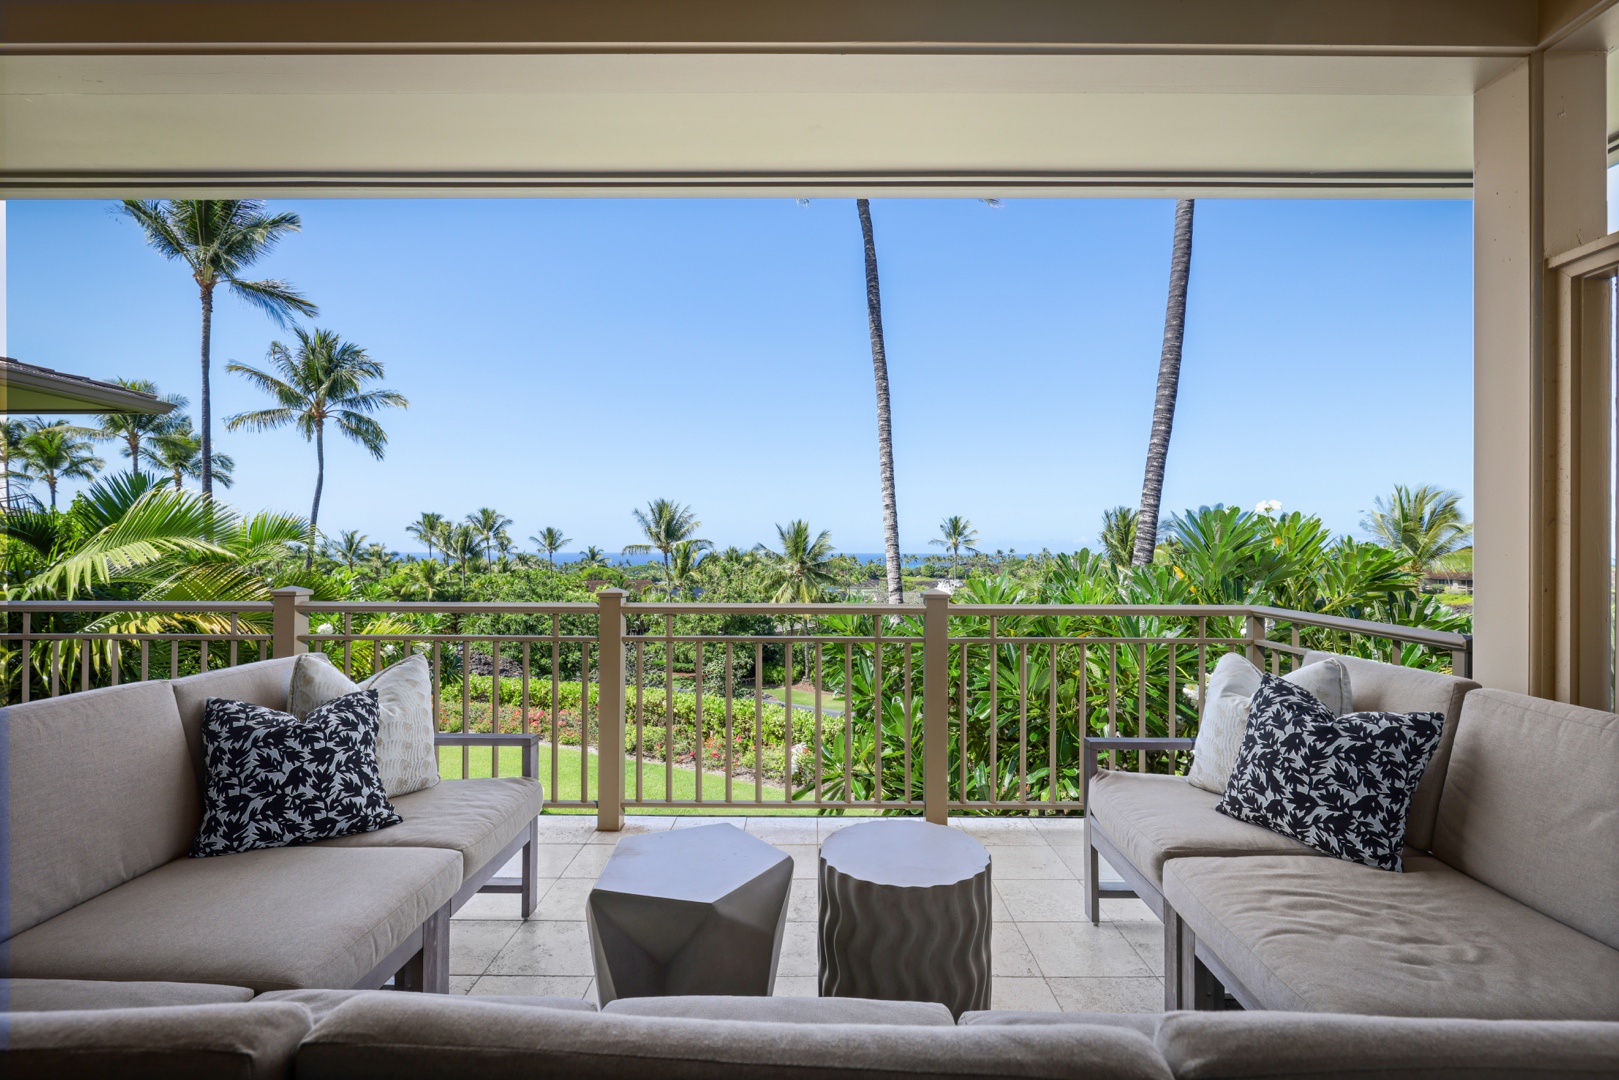 Kailua Kona Vacation Rentals, 3BD Ke Alaula Villa (210B) at Four Seasons Resort at Hualalai - Curl up with a book, catch up with family, and find your bliss in the year round tropical climate.